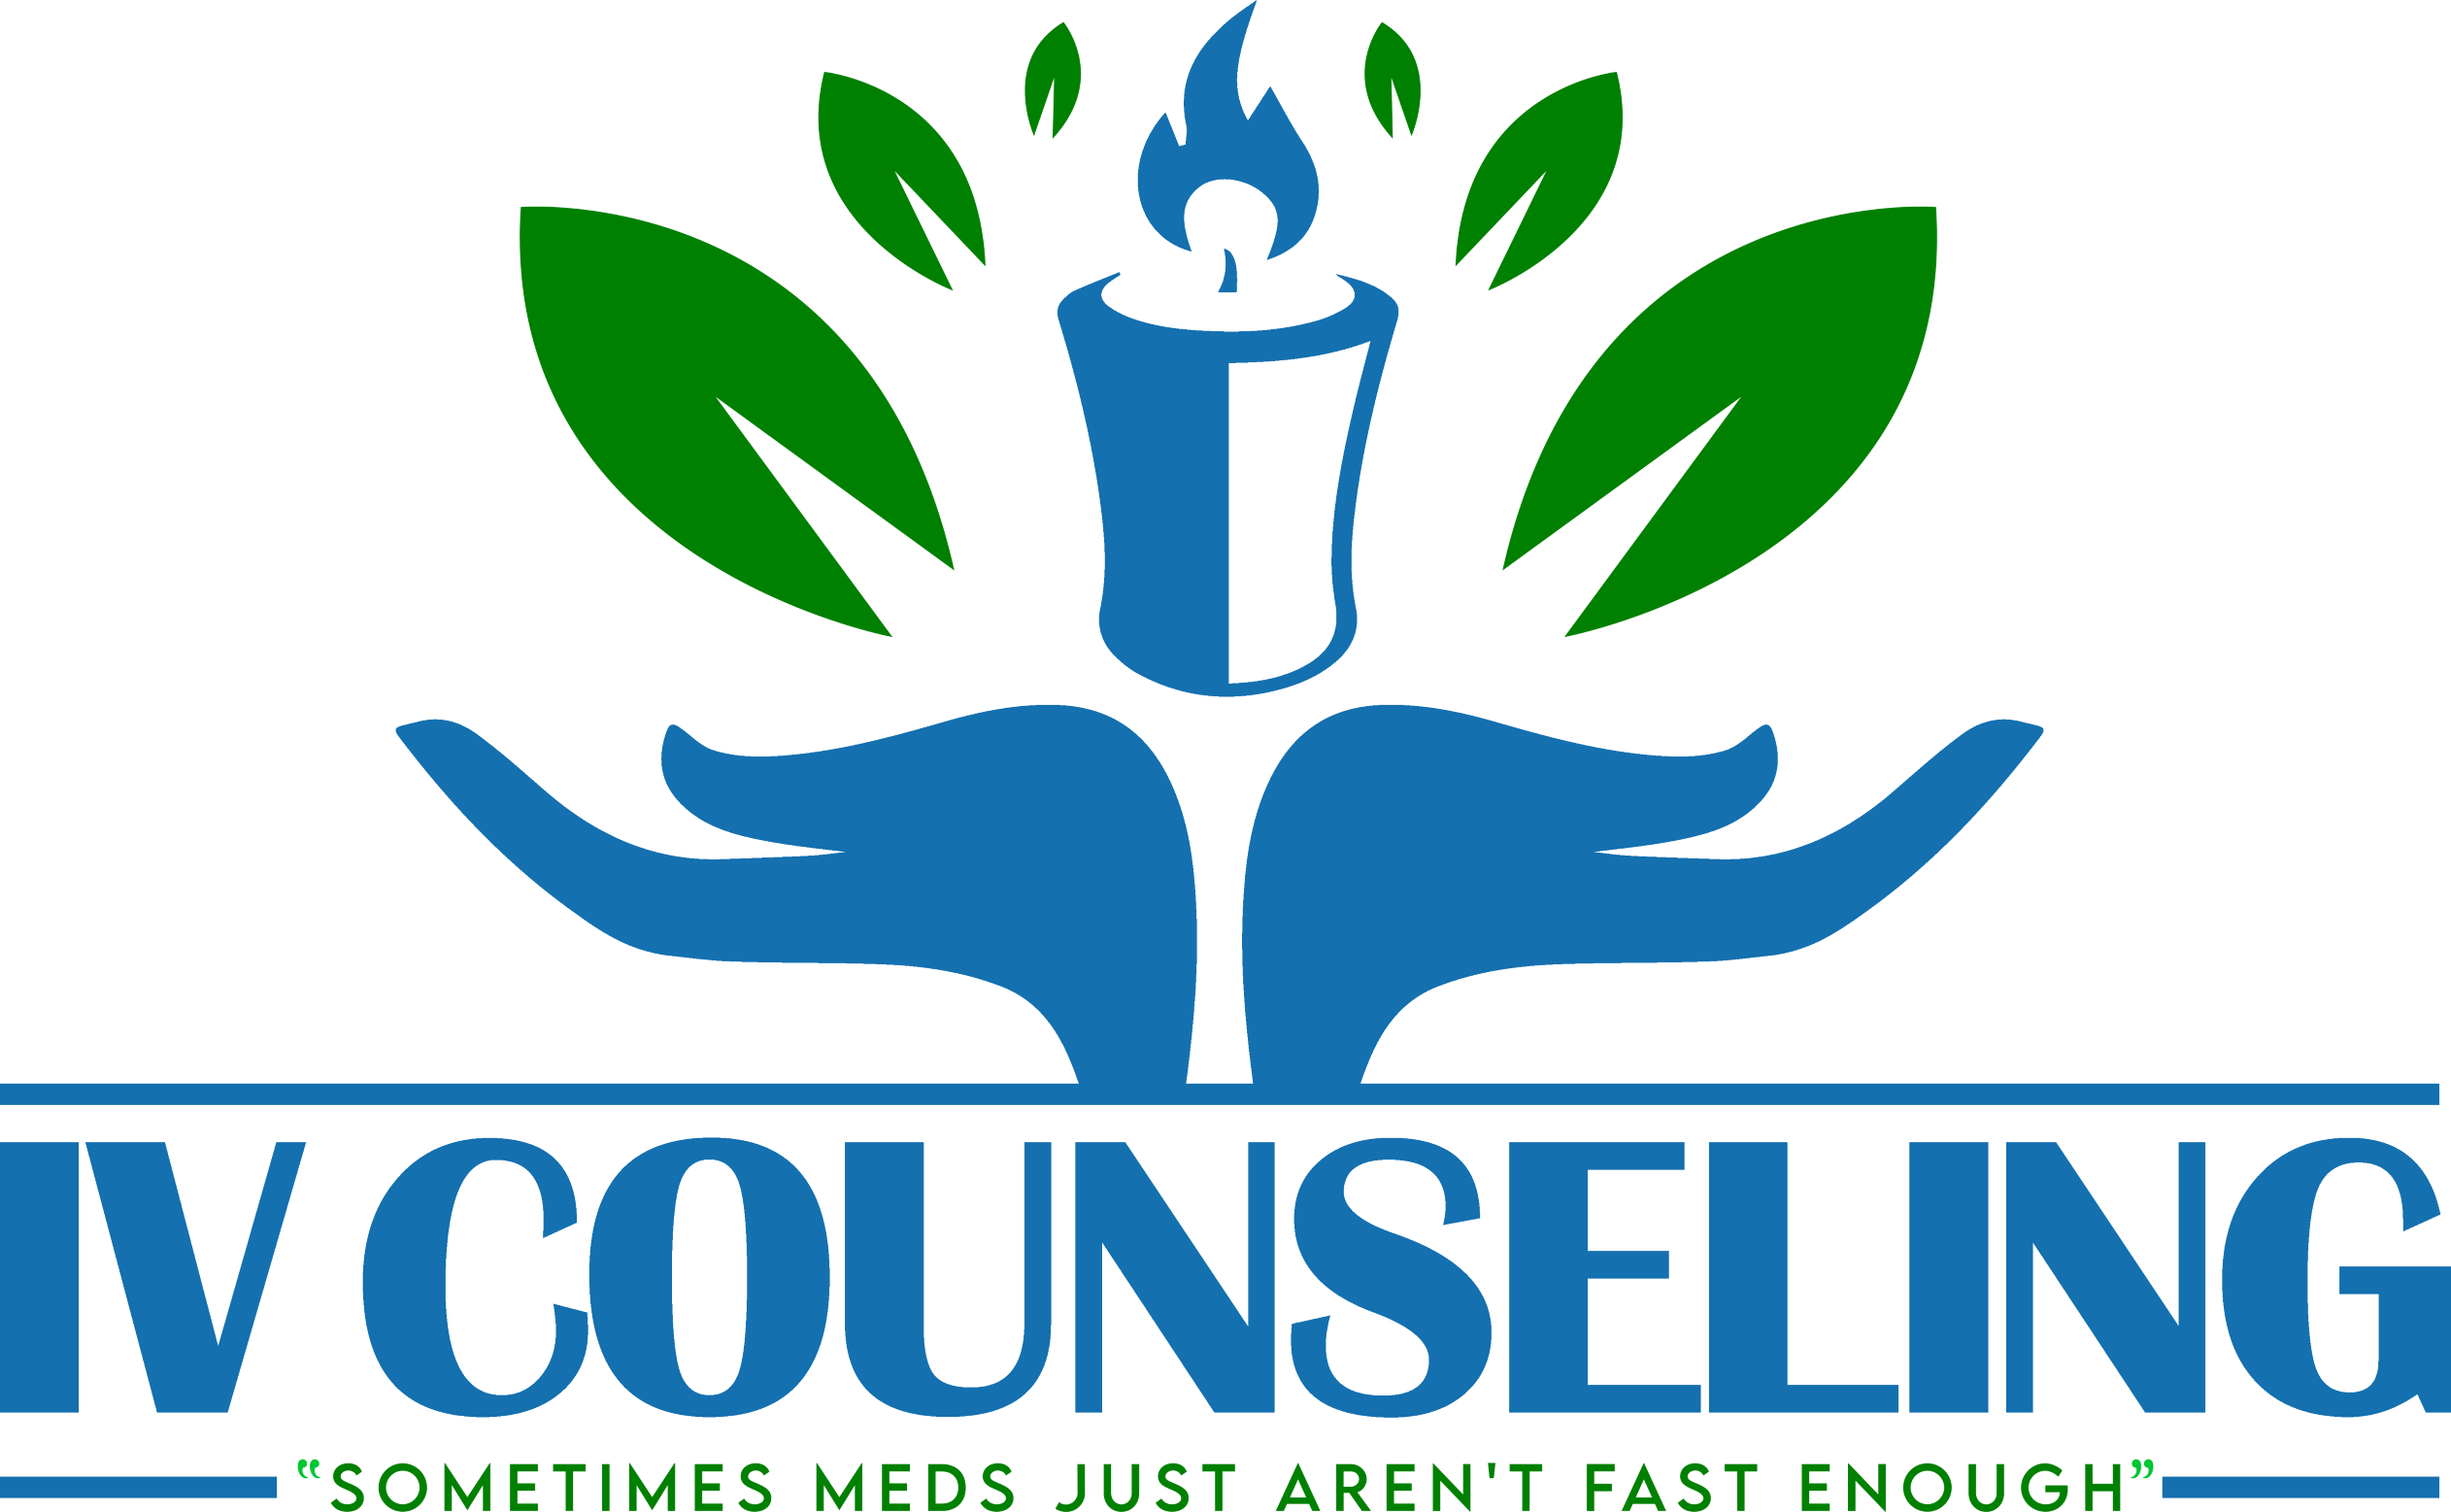 IV Counseling, Founded by Patrick Hagler, Offers Holistic Mental Health Support for Teens and Adults